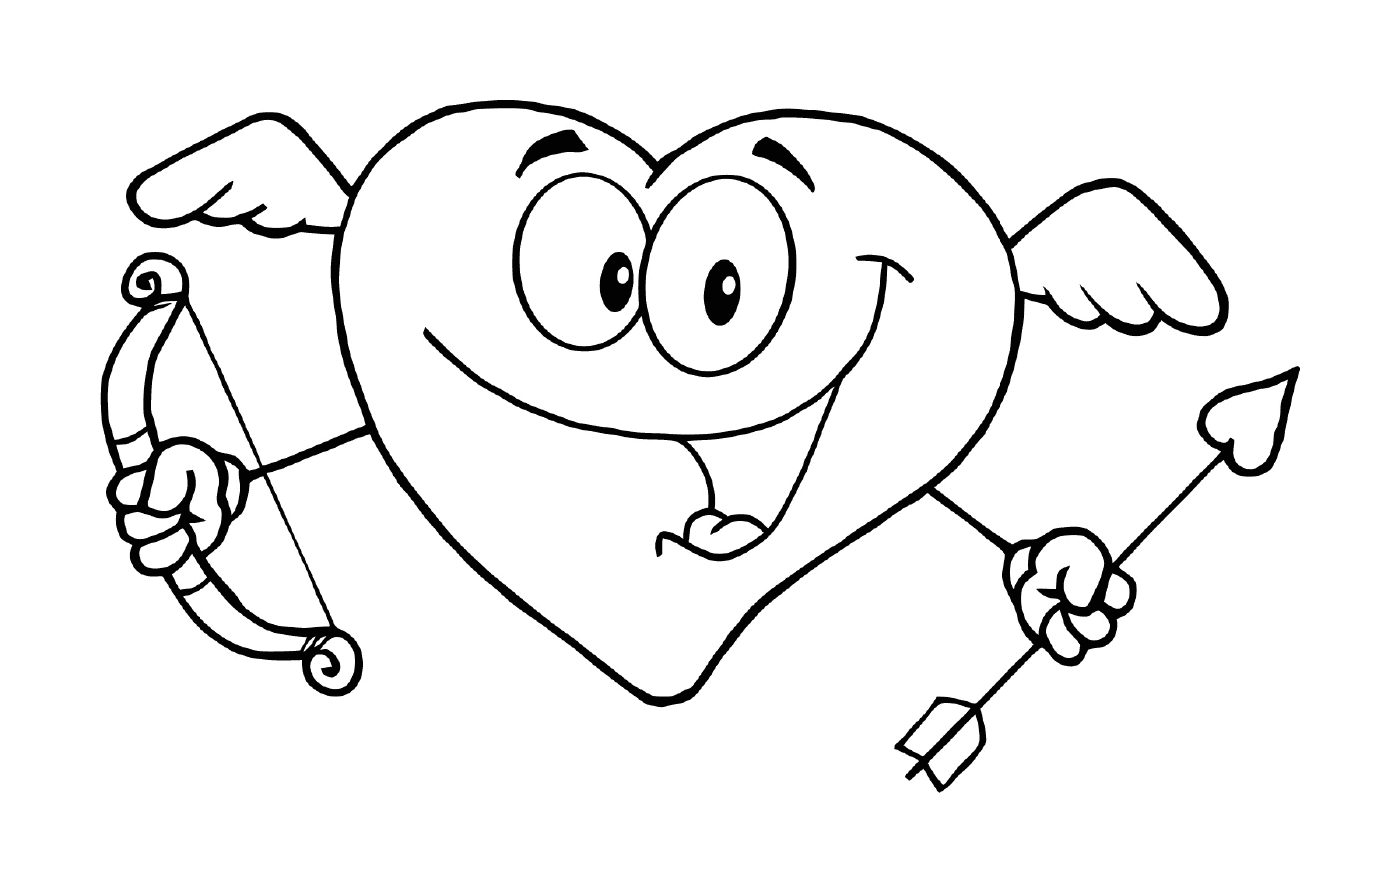  A cartoon with a smiling heart 